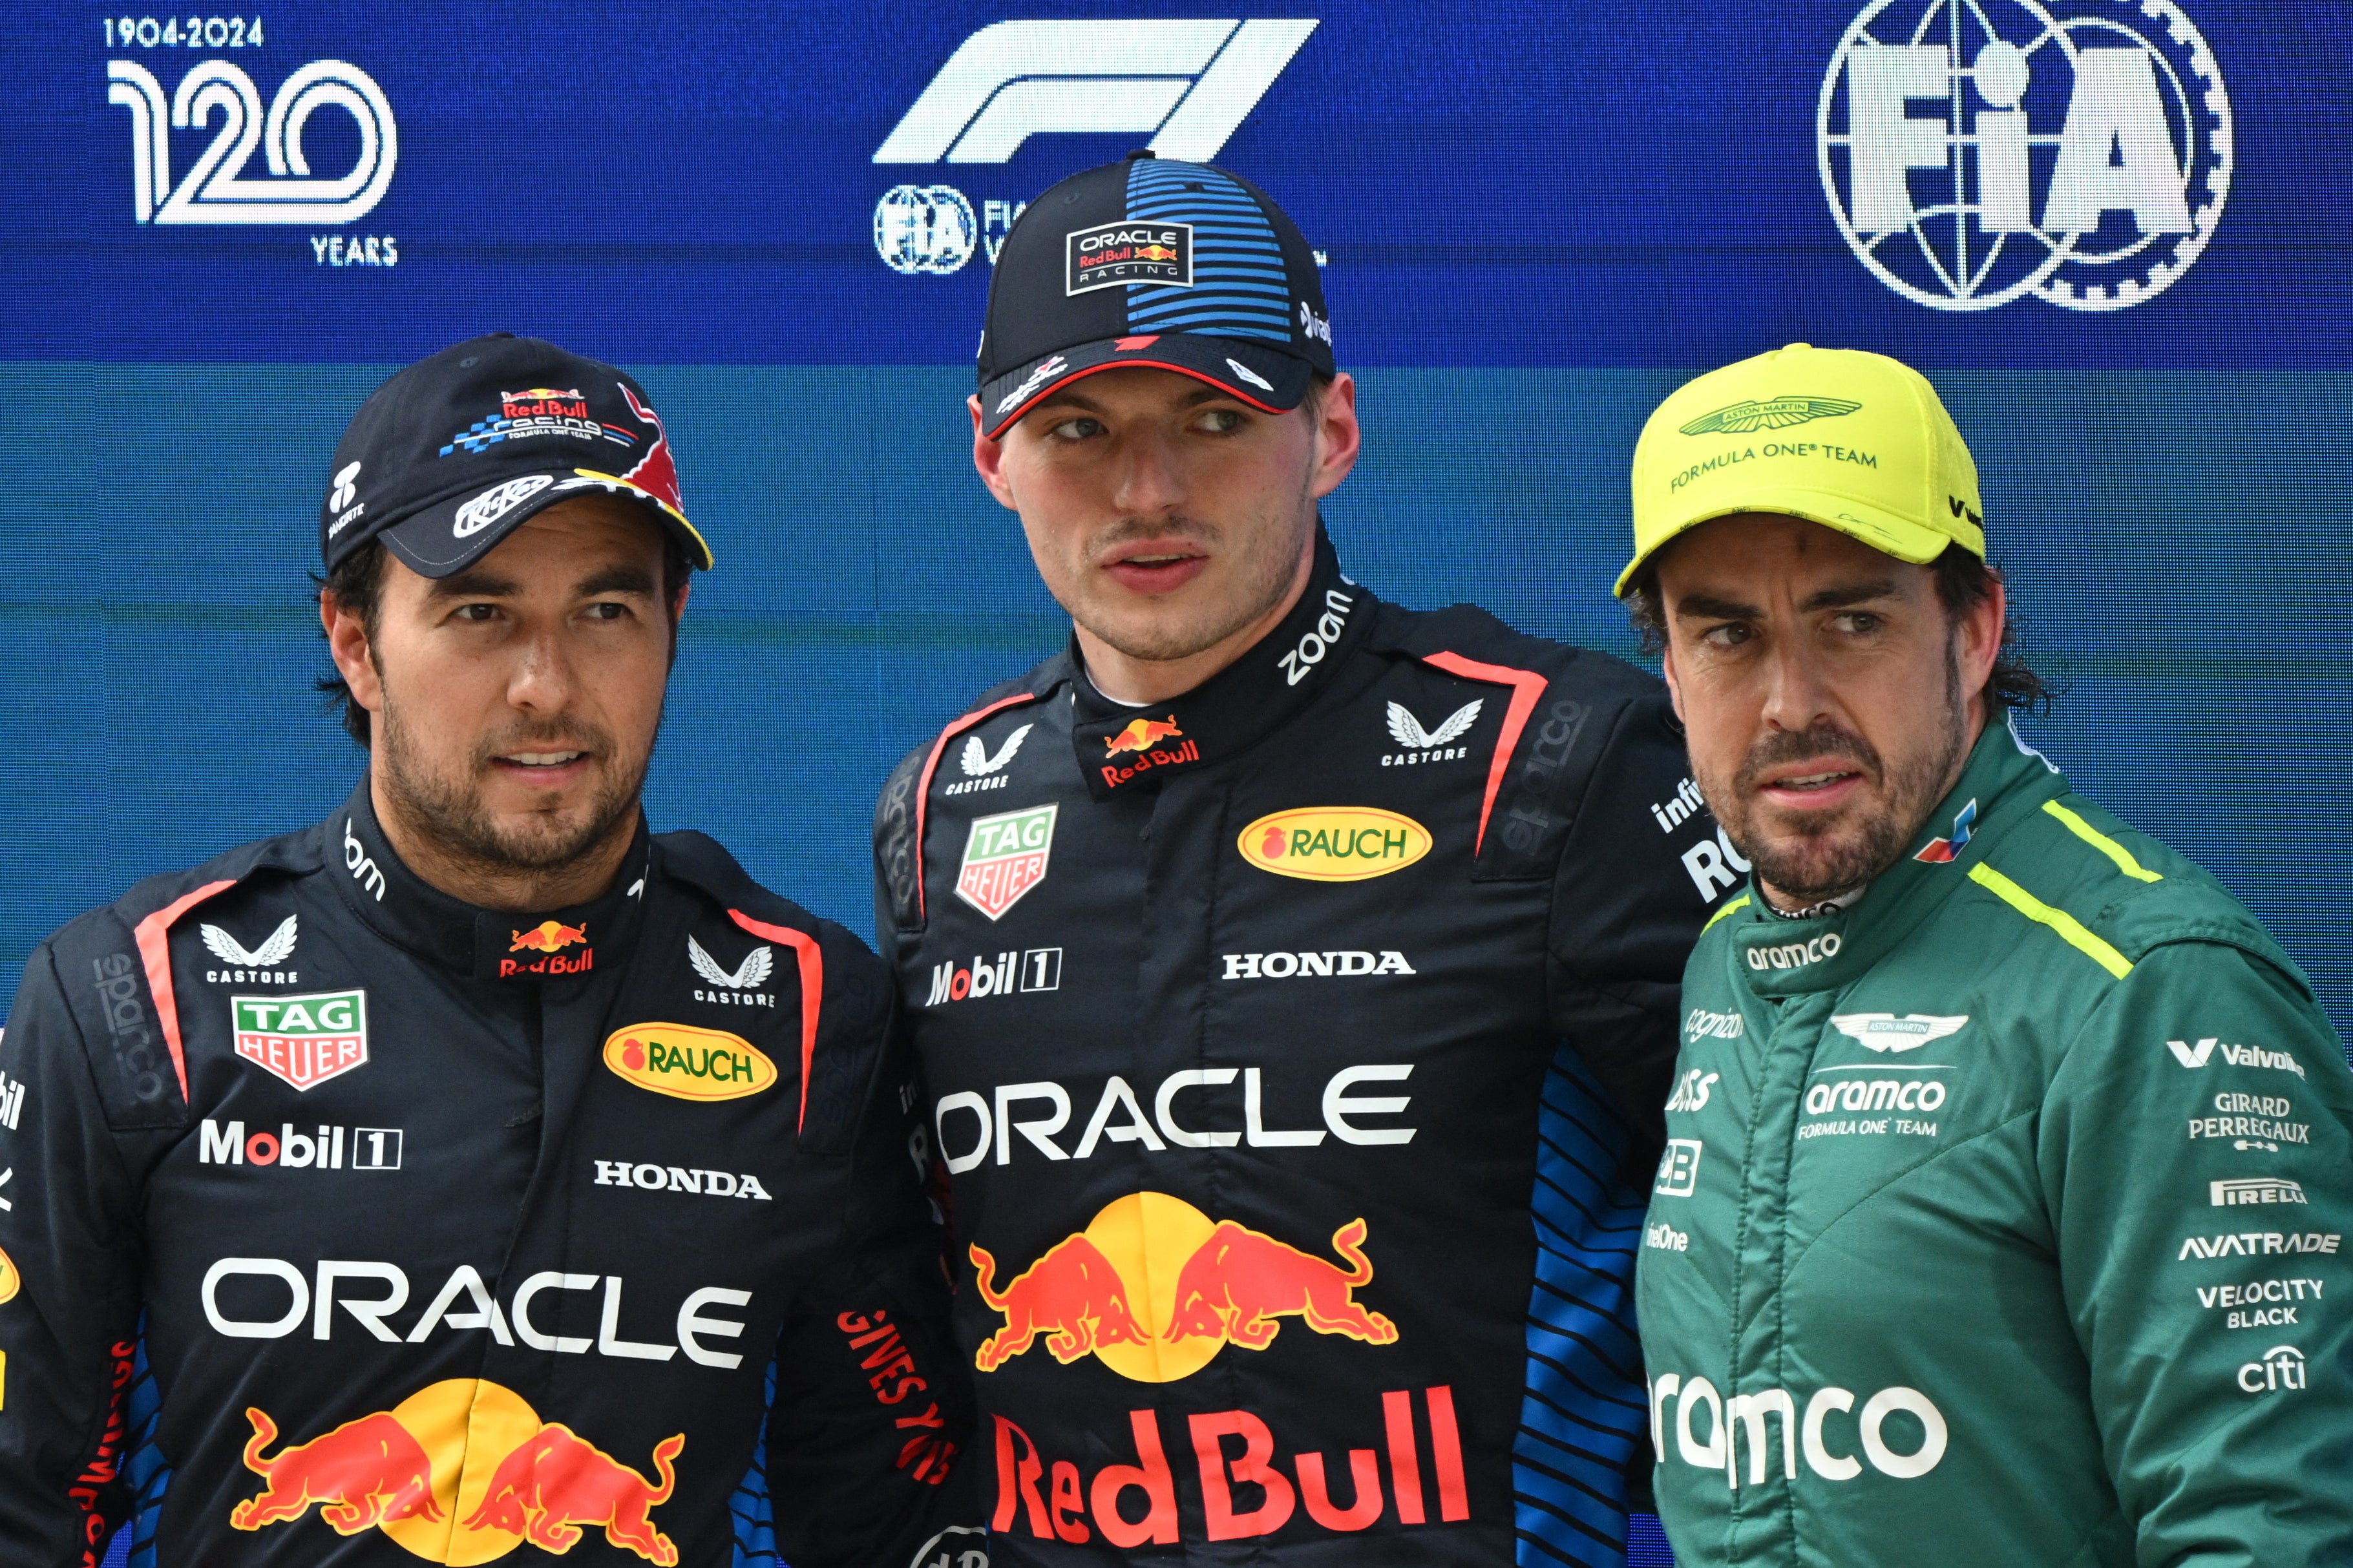 Verstappen (centre) and Alonso (right) have shared the podium on occasion